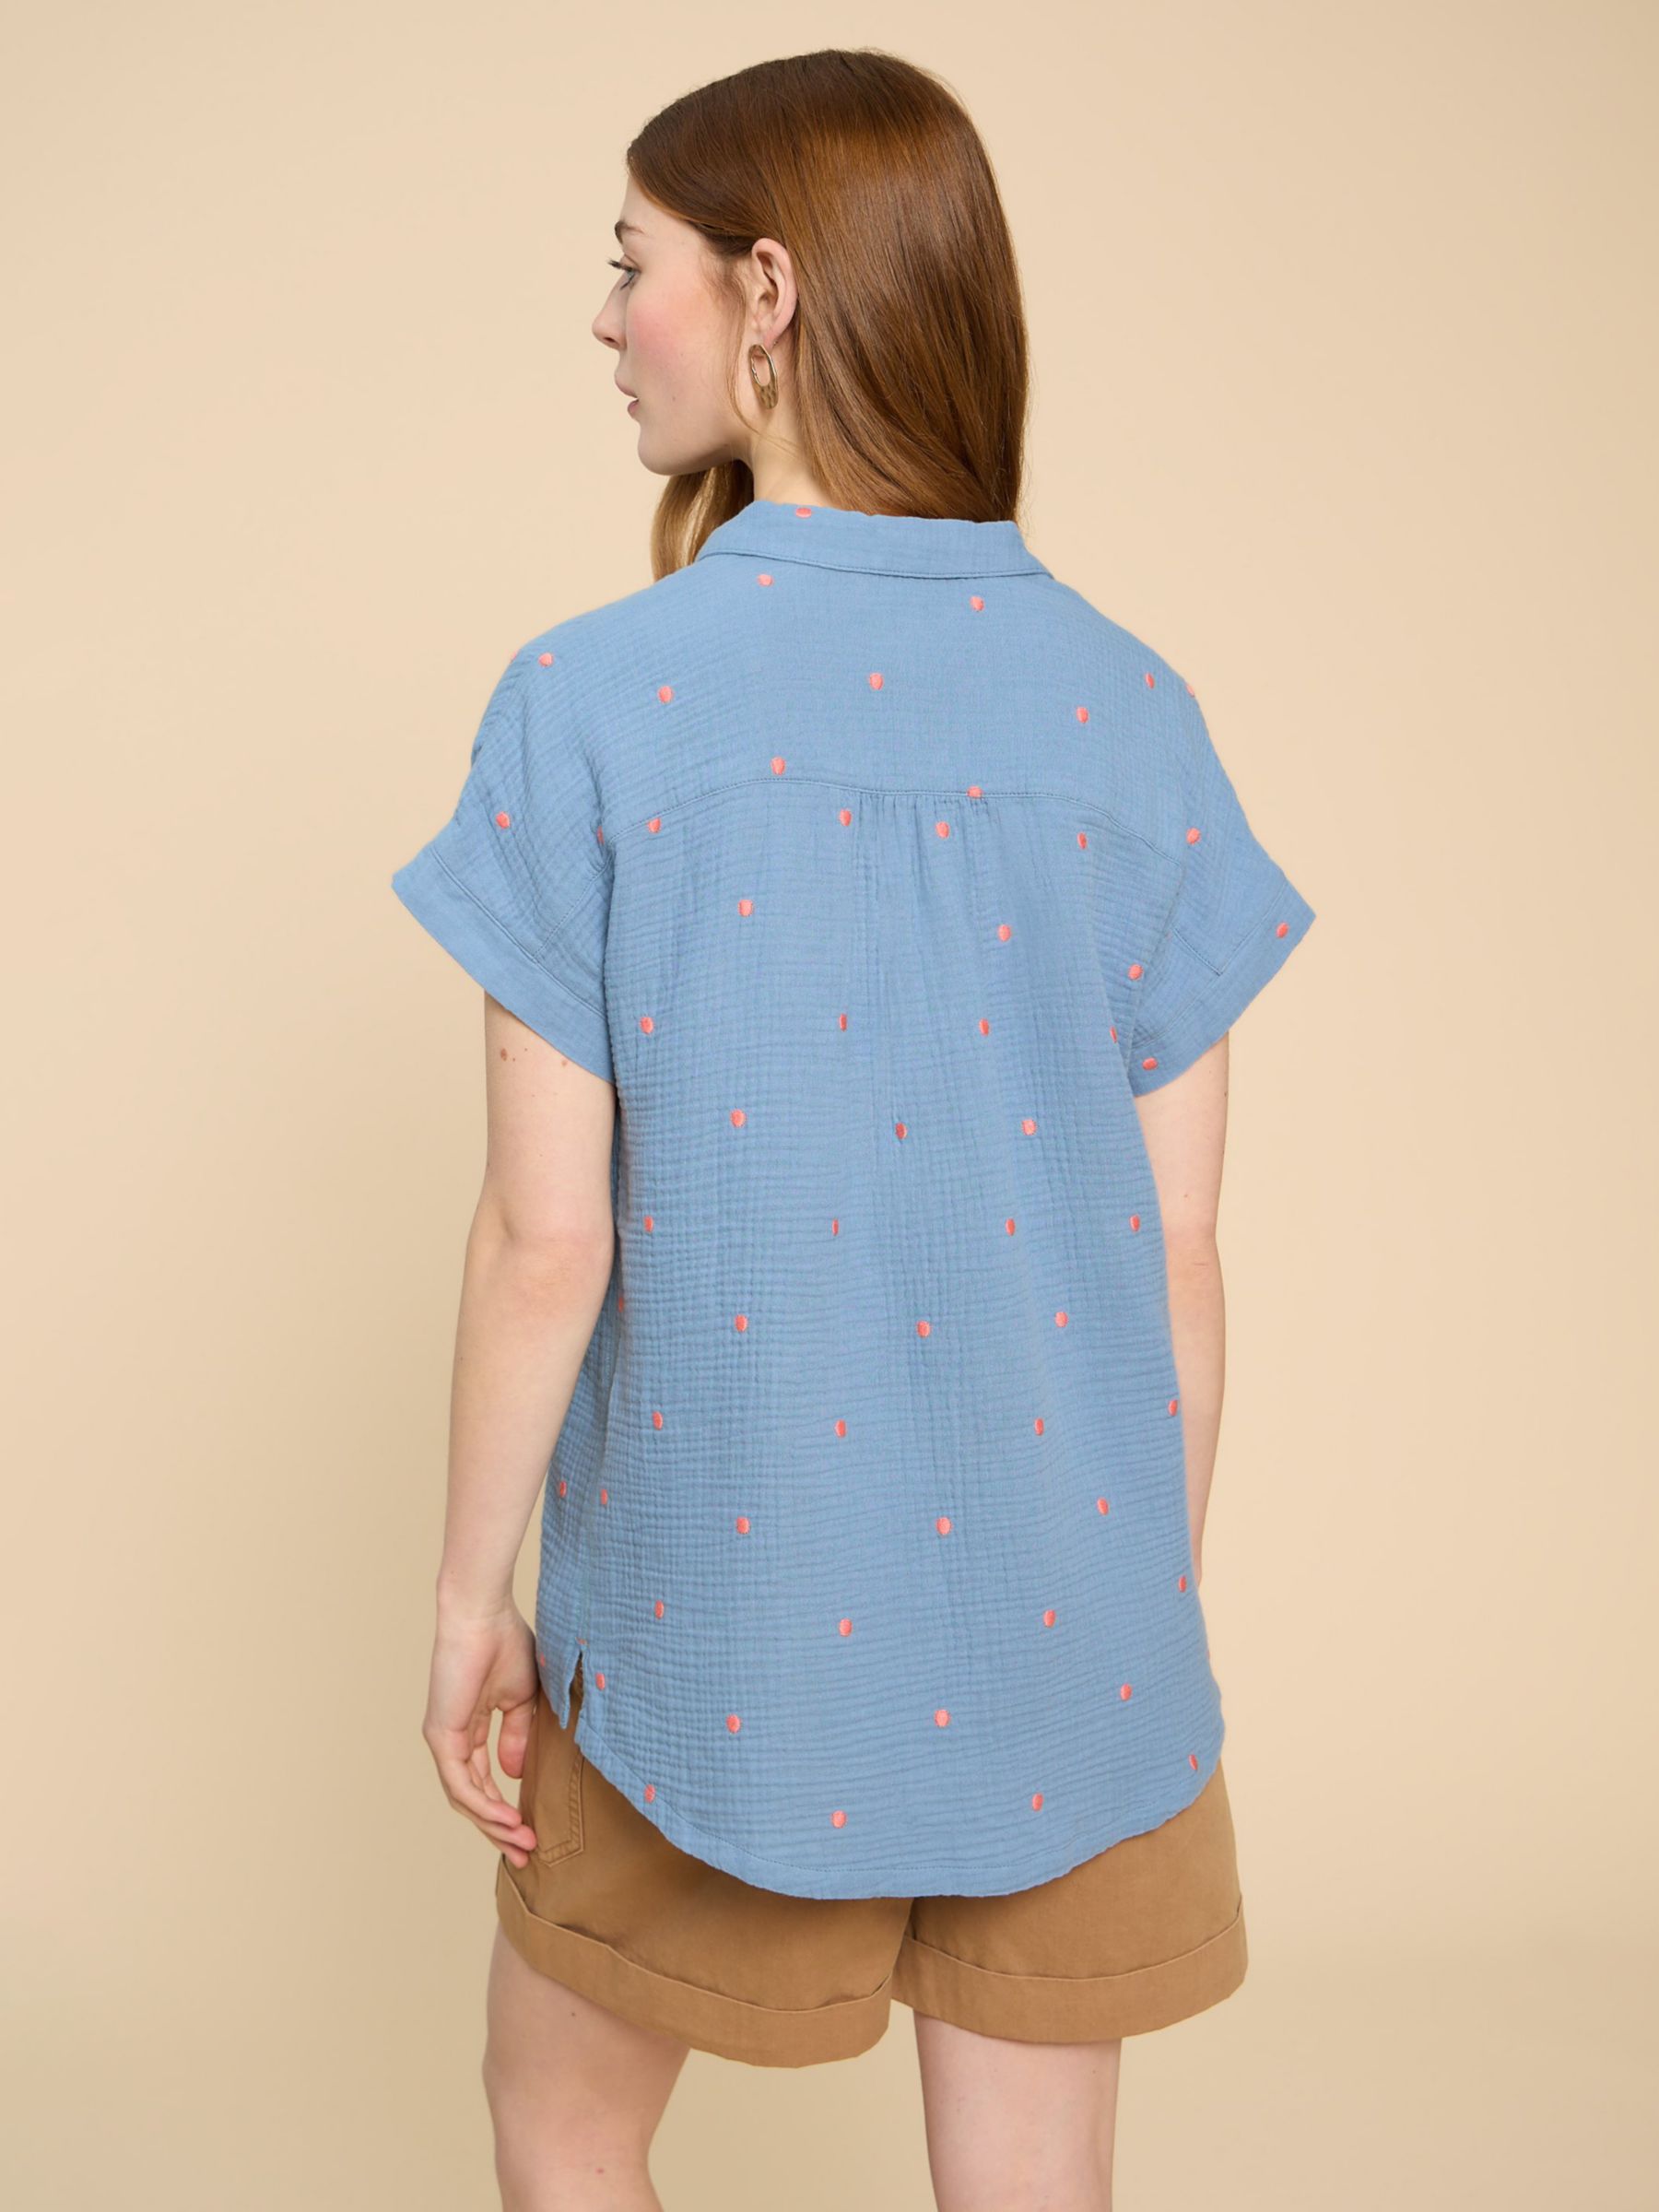 Buy White Stuff Emma Embroidered Shirt Online at johnlewis.com